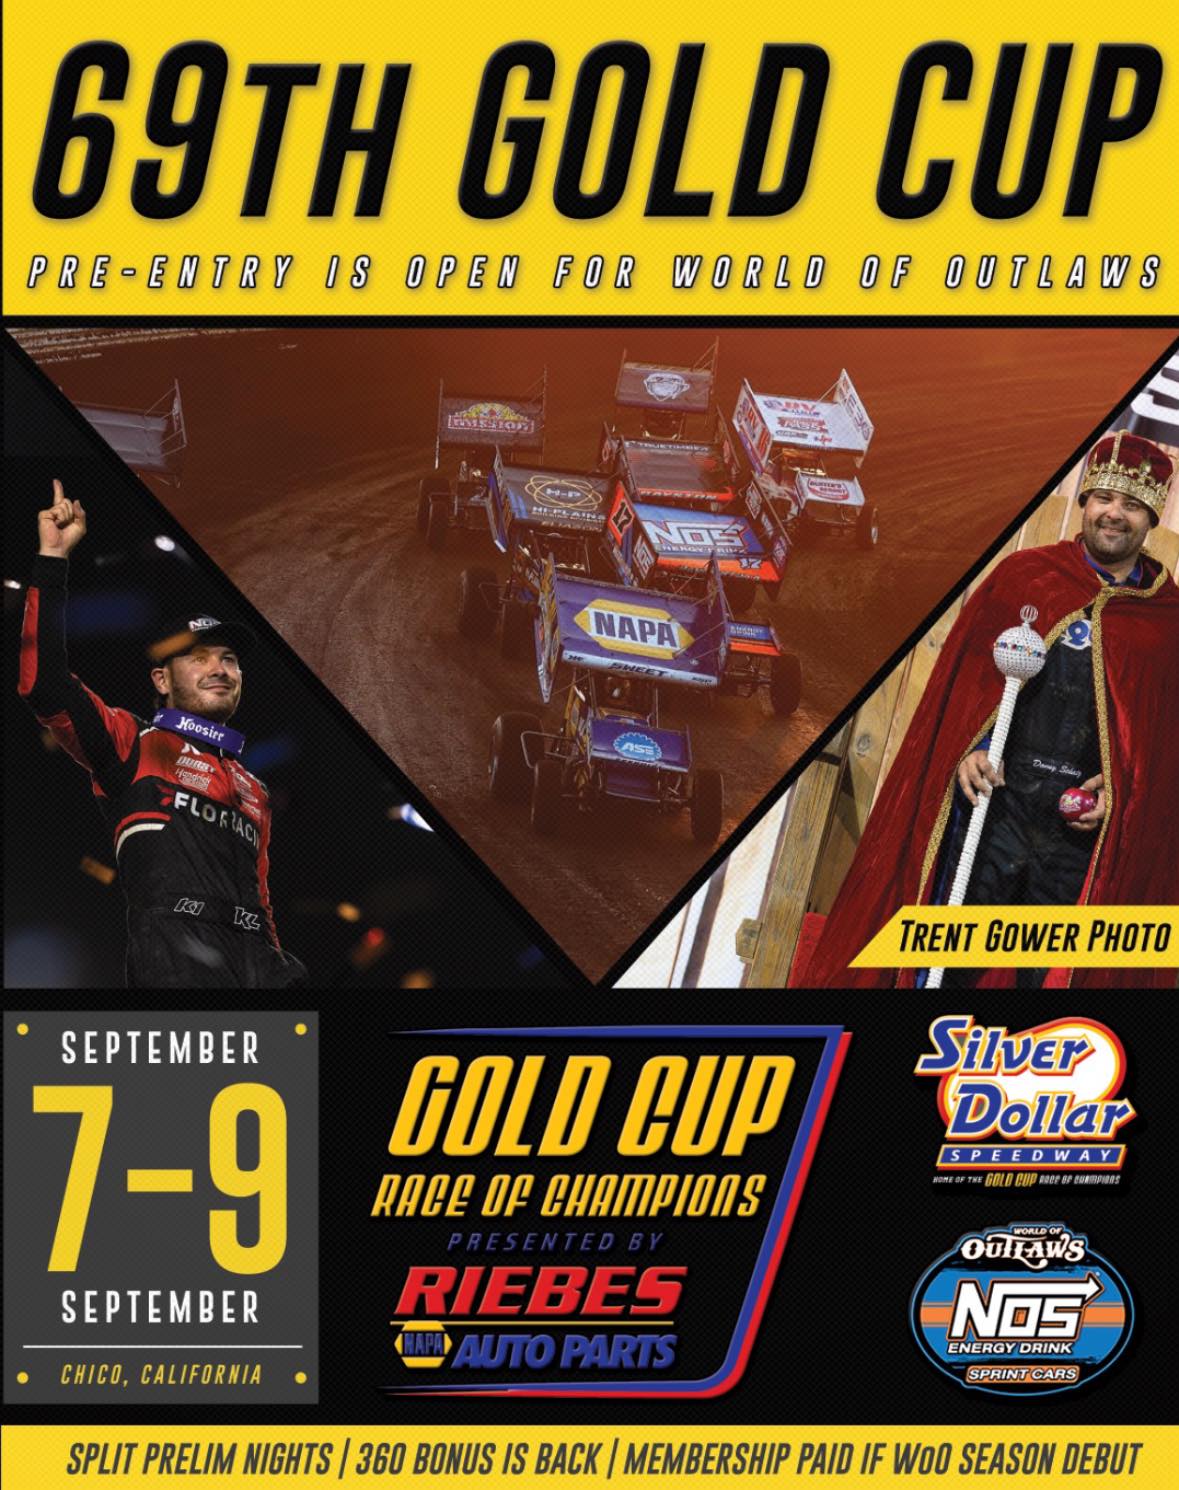 Gold Cup Race of Champions